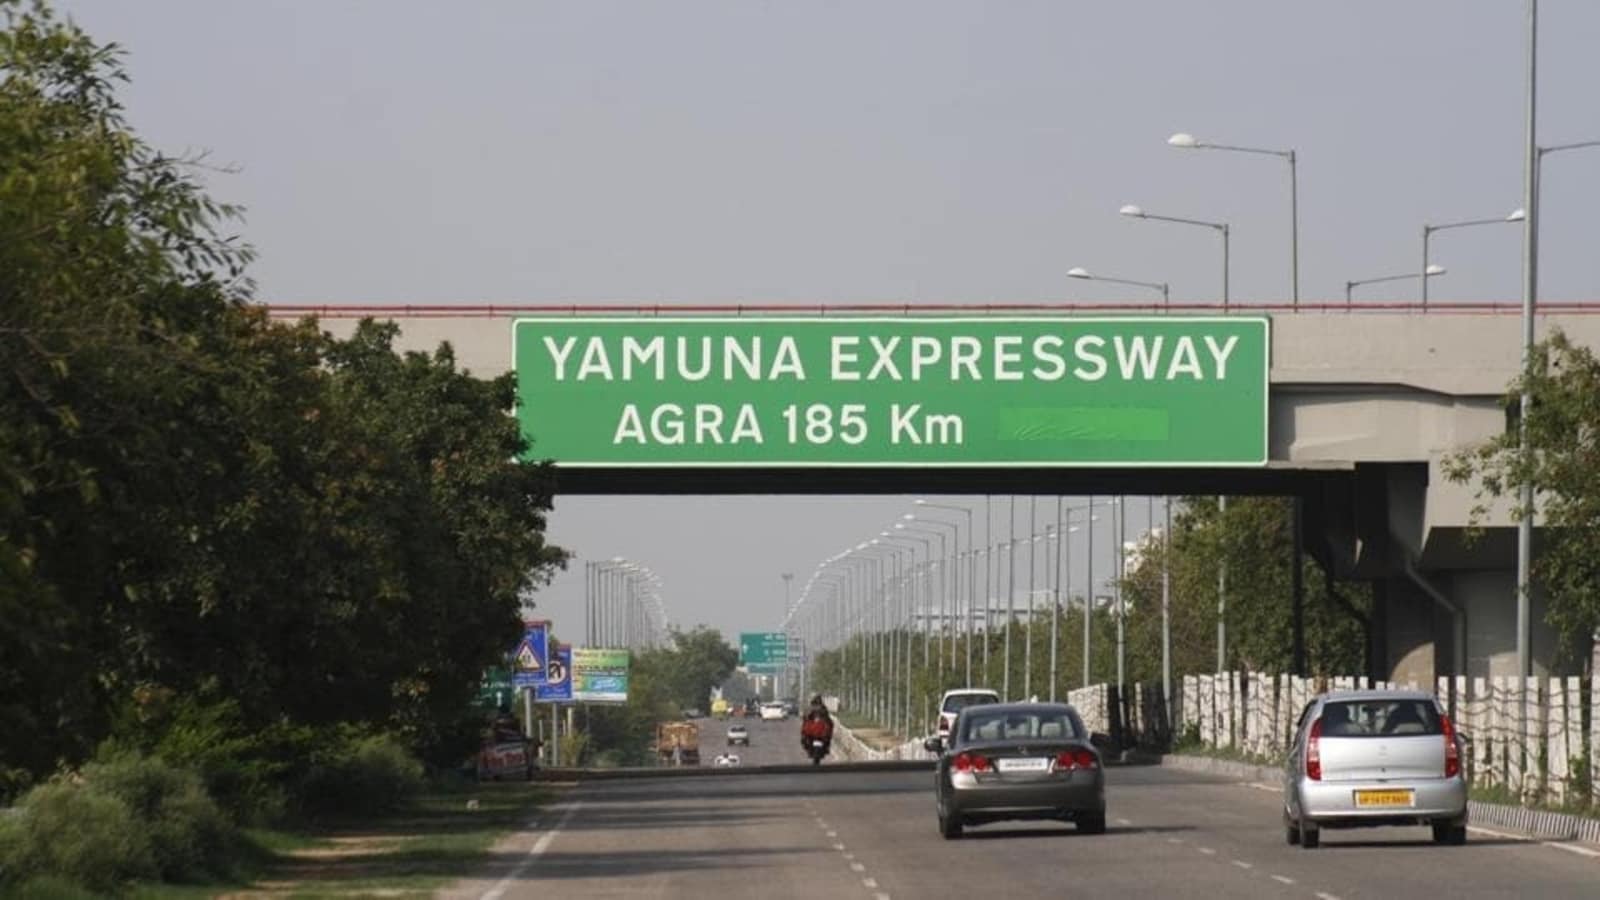 Fine for flouting speed limit, crash barriers on Yamuna Expressway soon - Hindustan Times